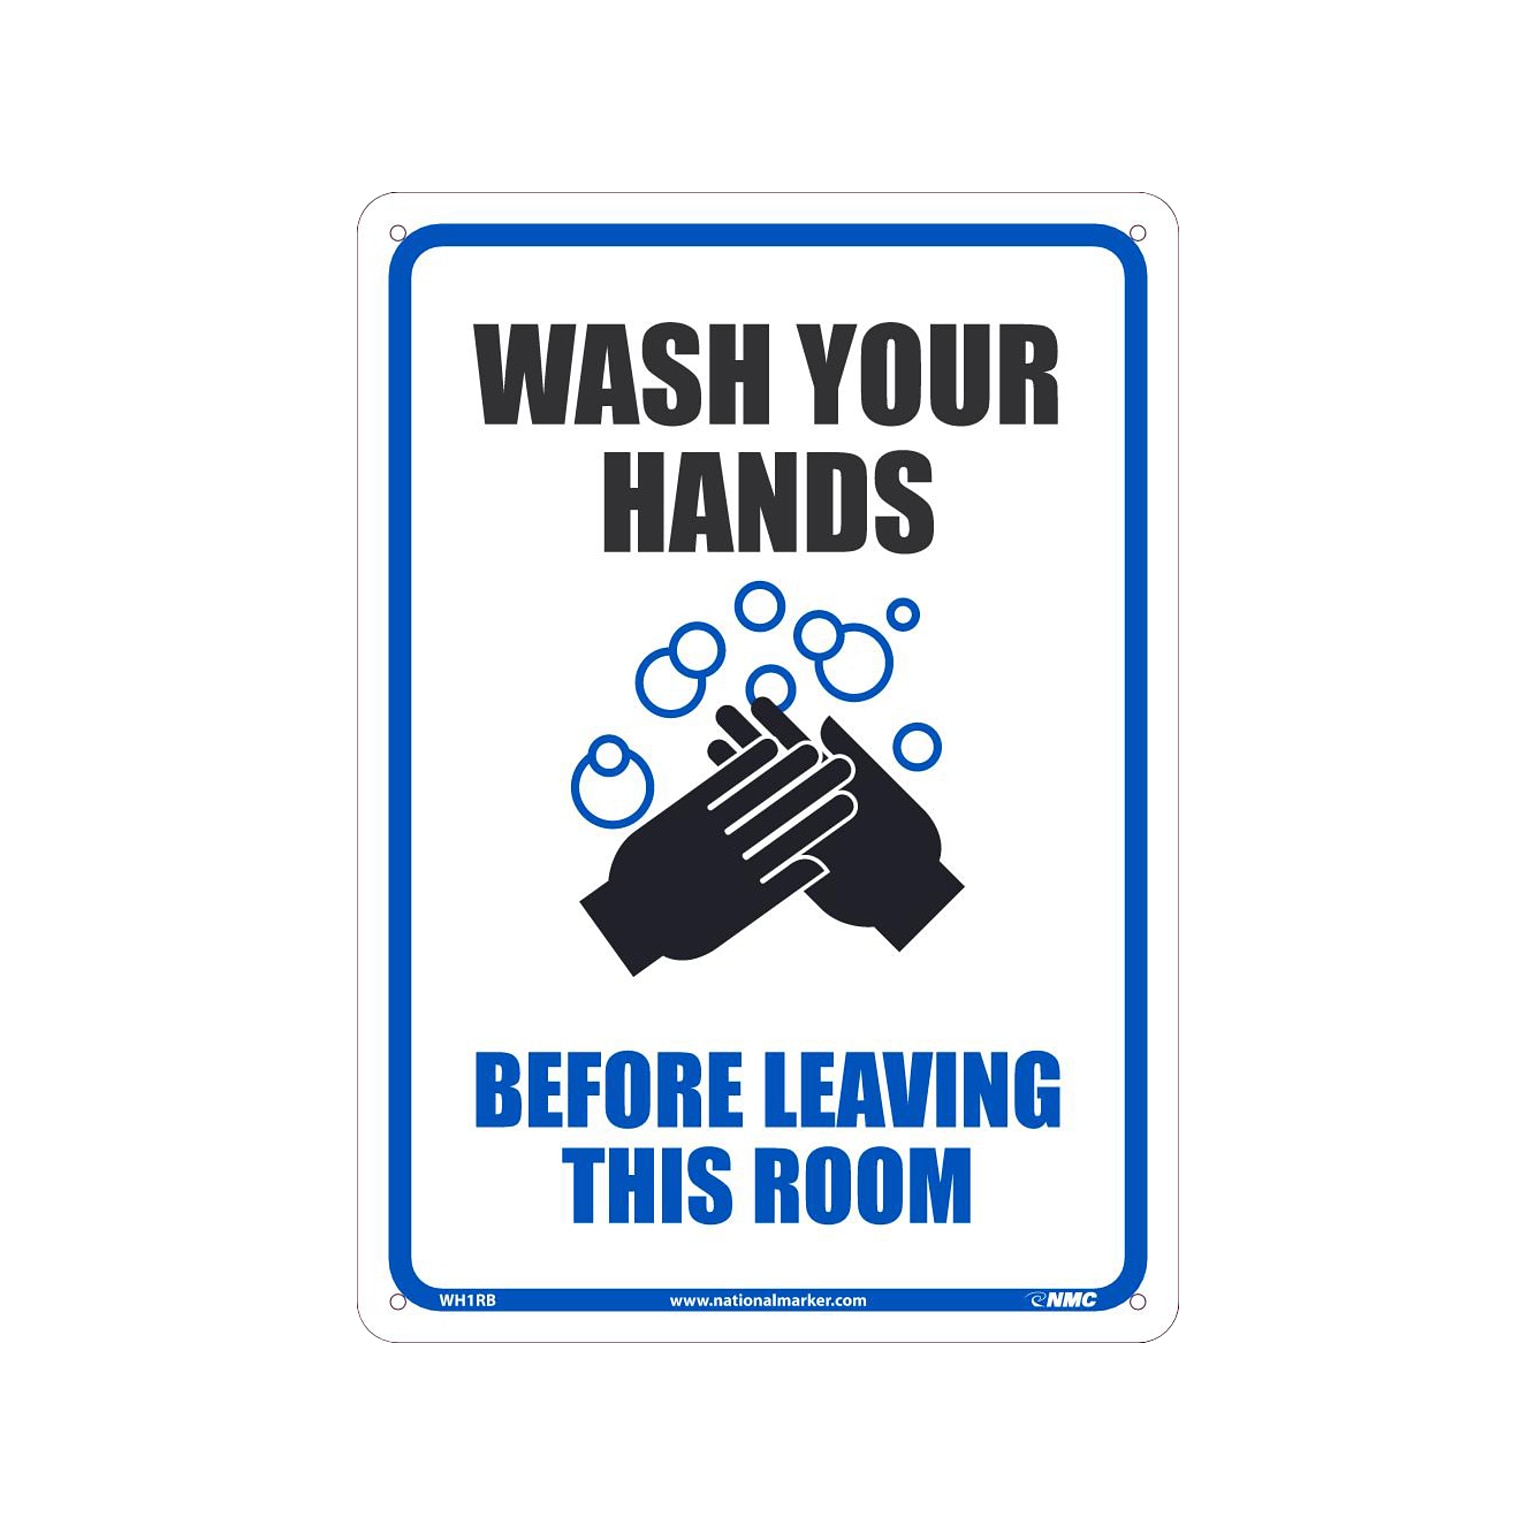 National Marker Wall Sign, Wash Your Hands Before Entering This Room, Plastic, 14 x 10, White/Blue/Black (WH1RB)